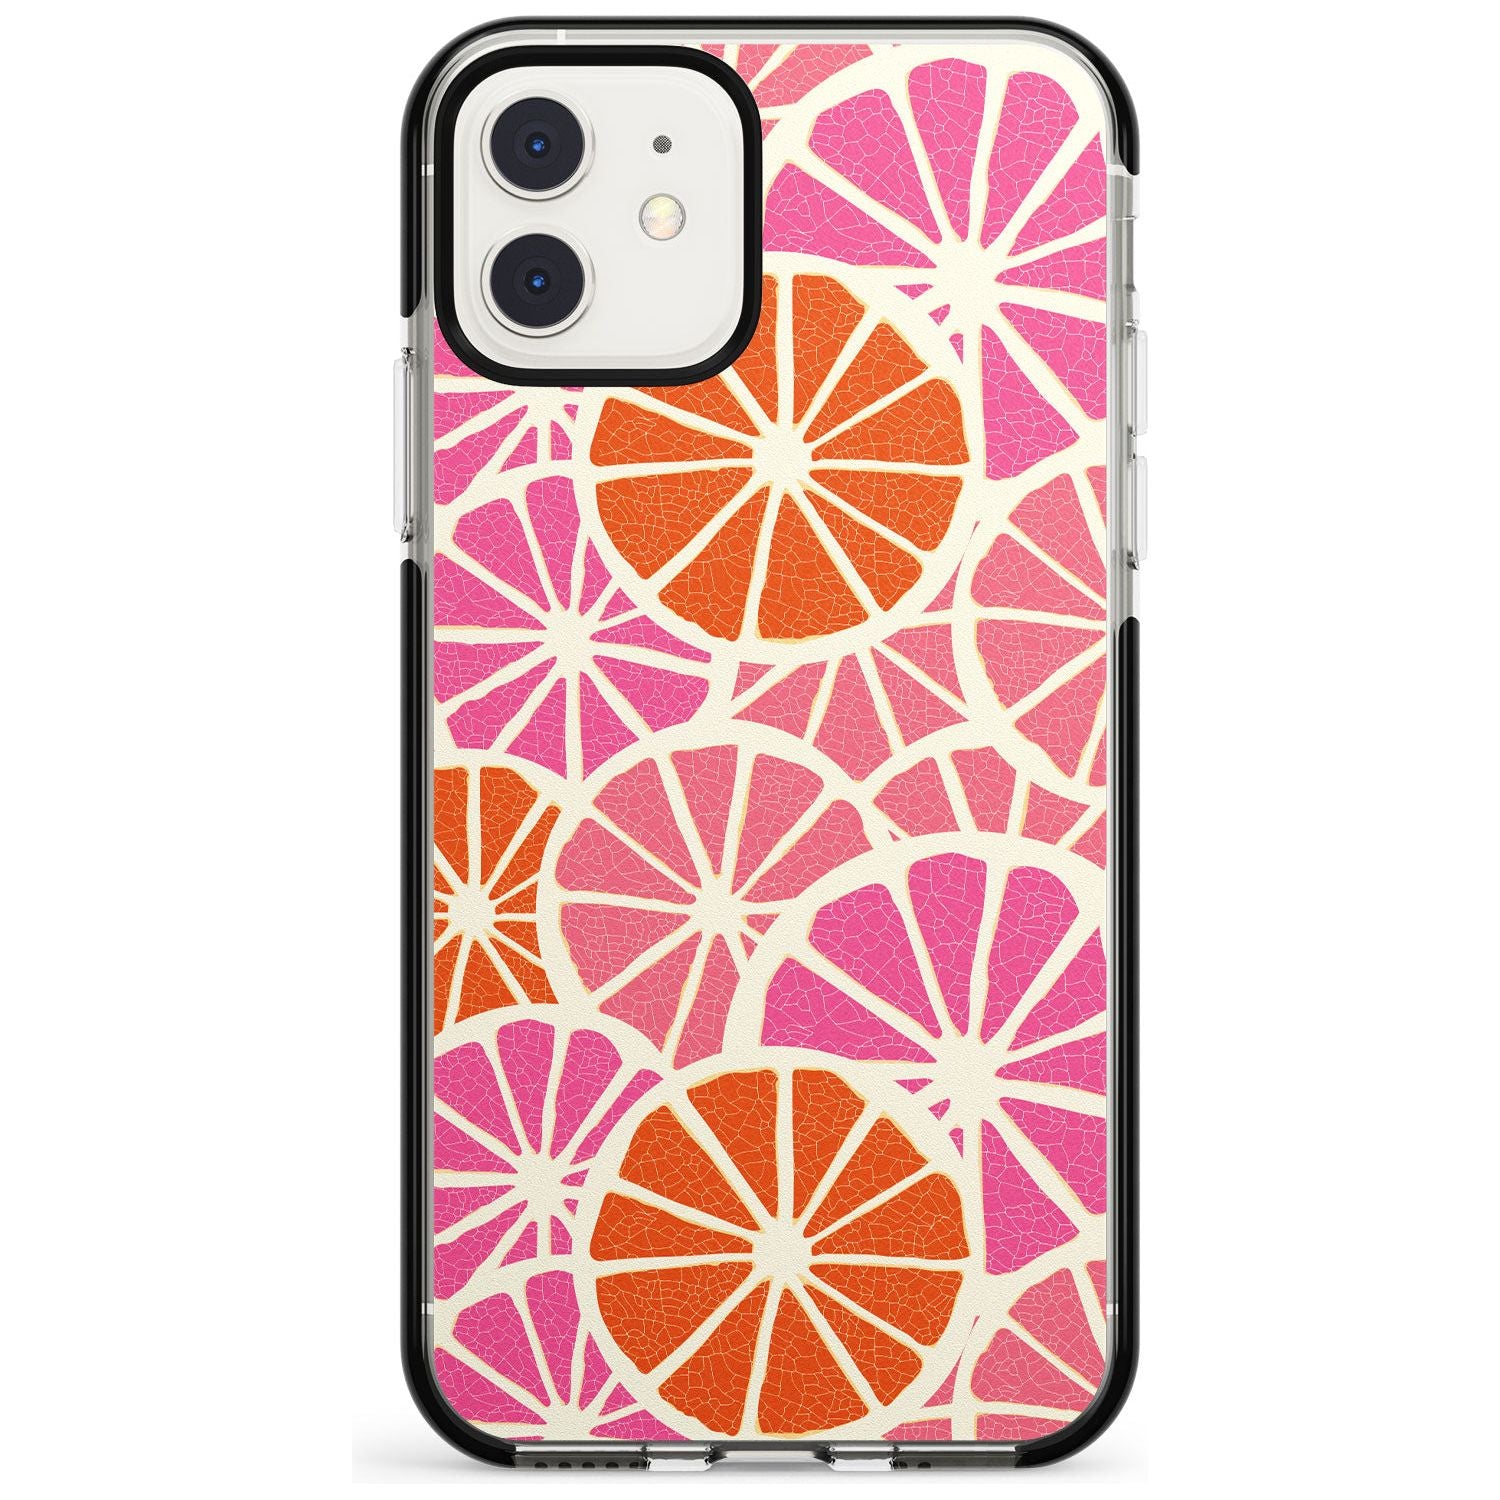 Citrus Slices Pink Fade Impact Phone Case for iPhone 11 Pro Max